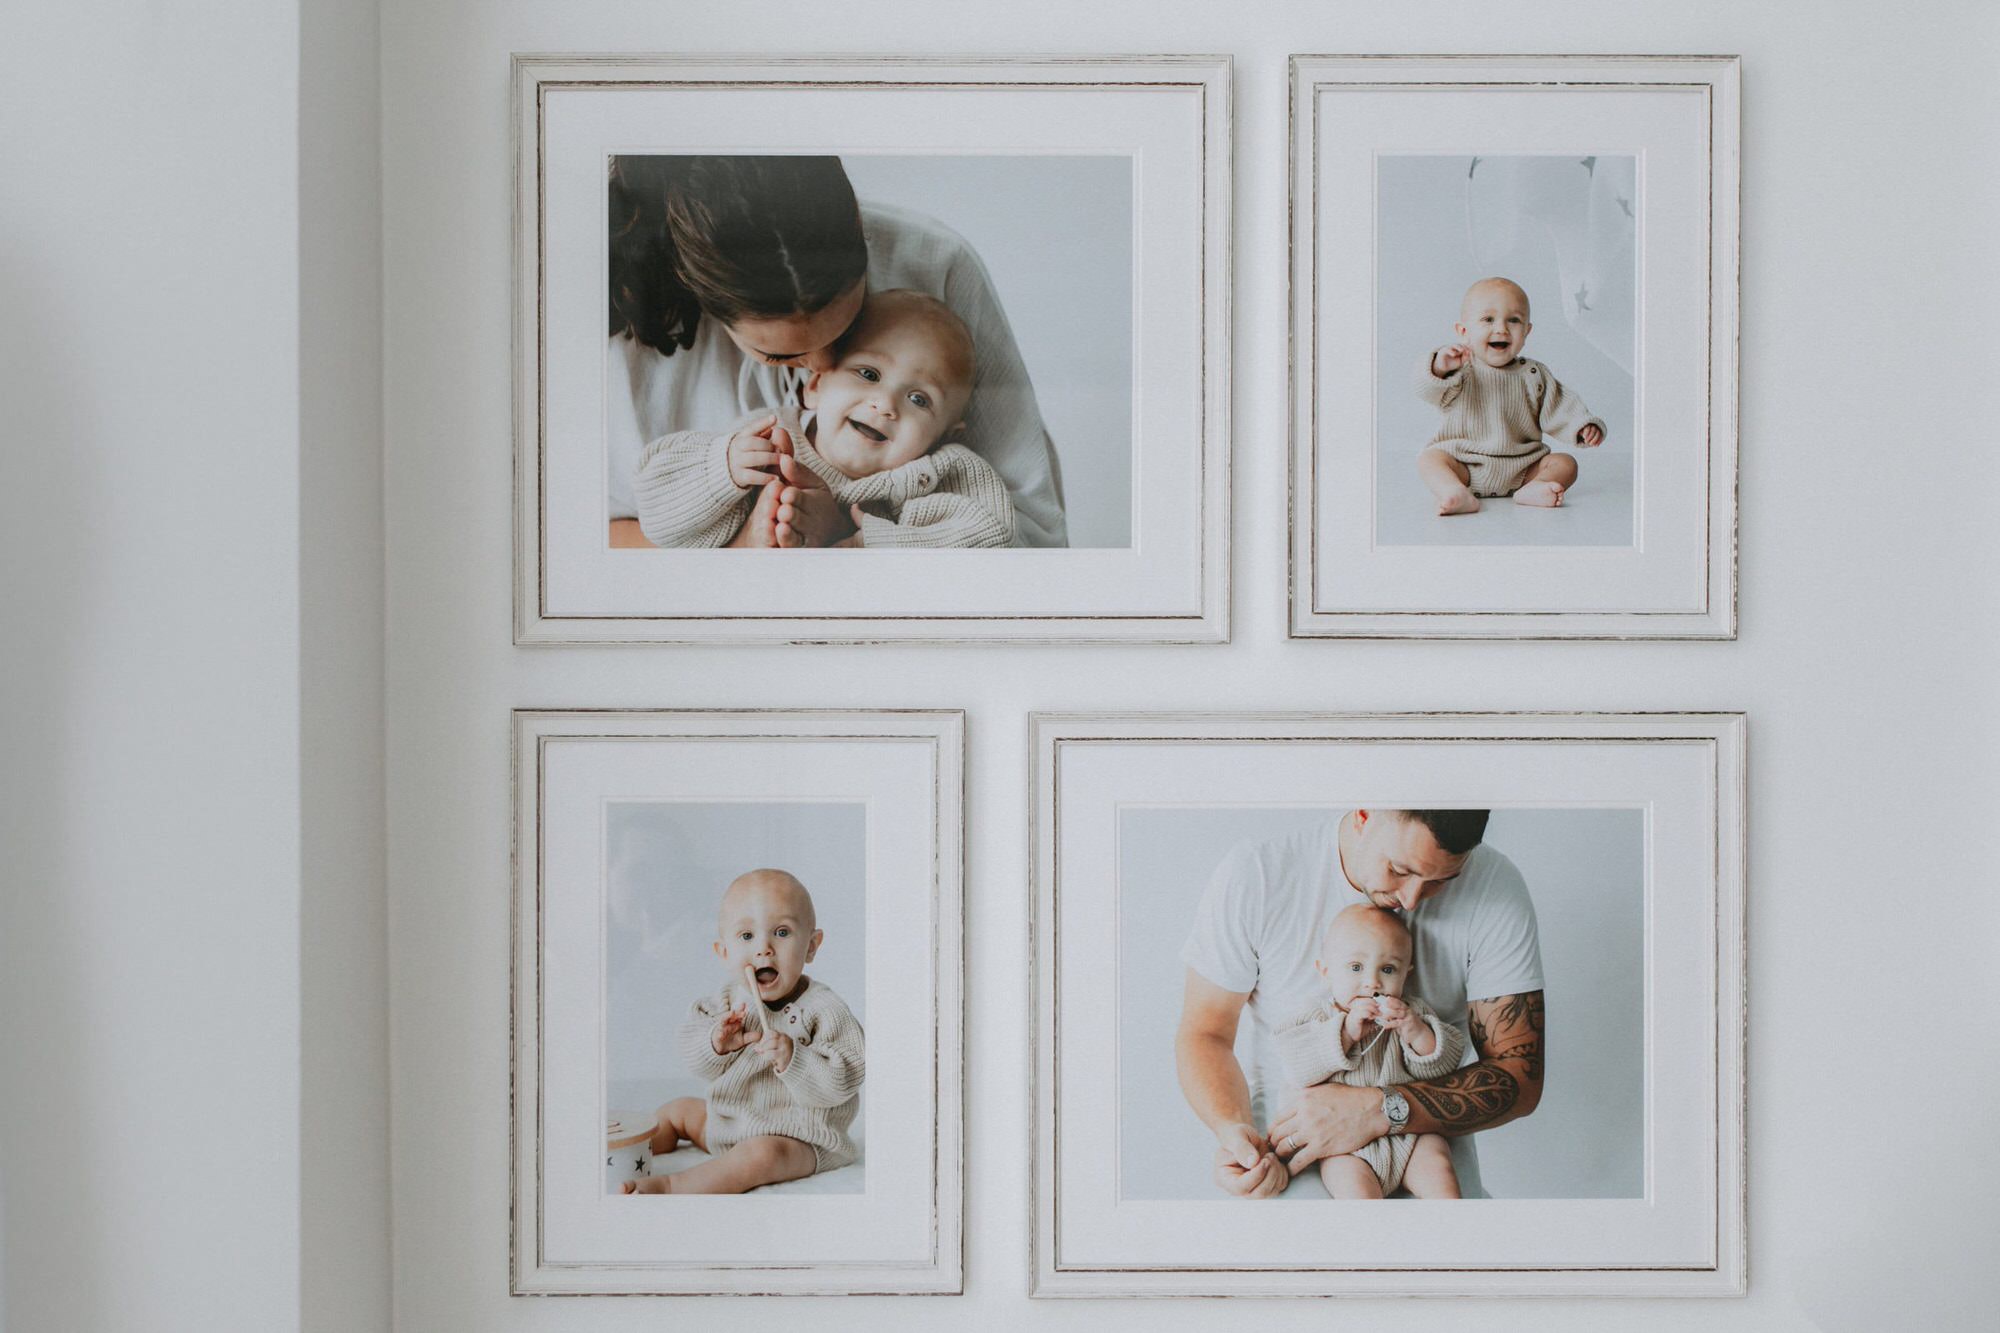 bespoke frame collection showcasing baby images taken at Kent baby photography studio in Bexley